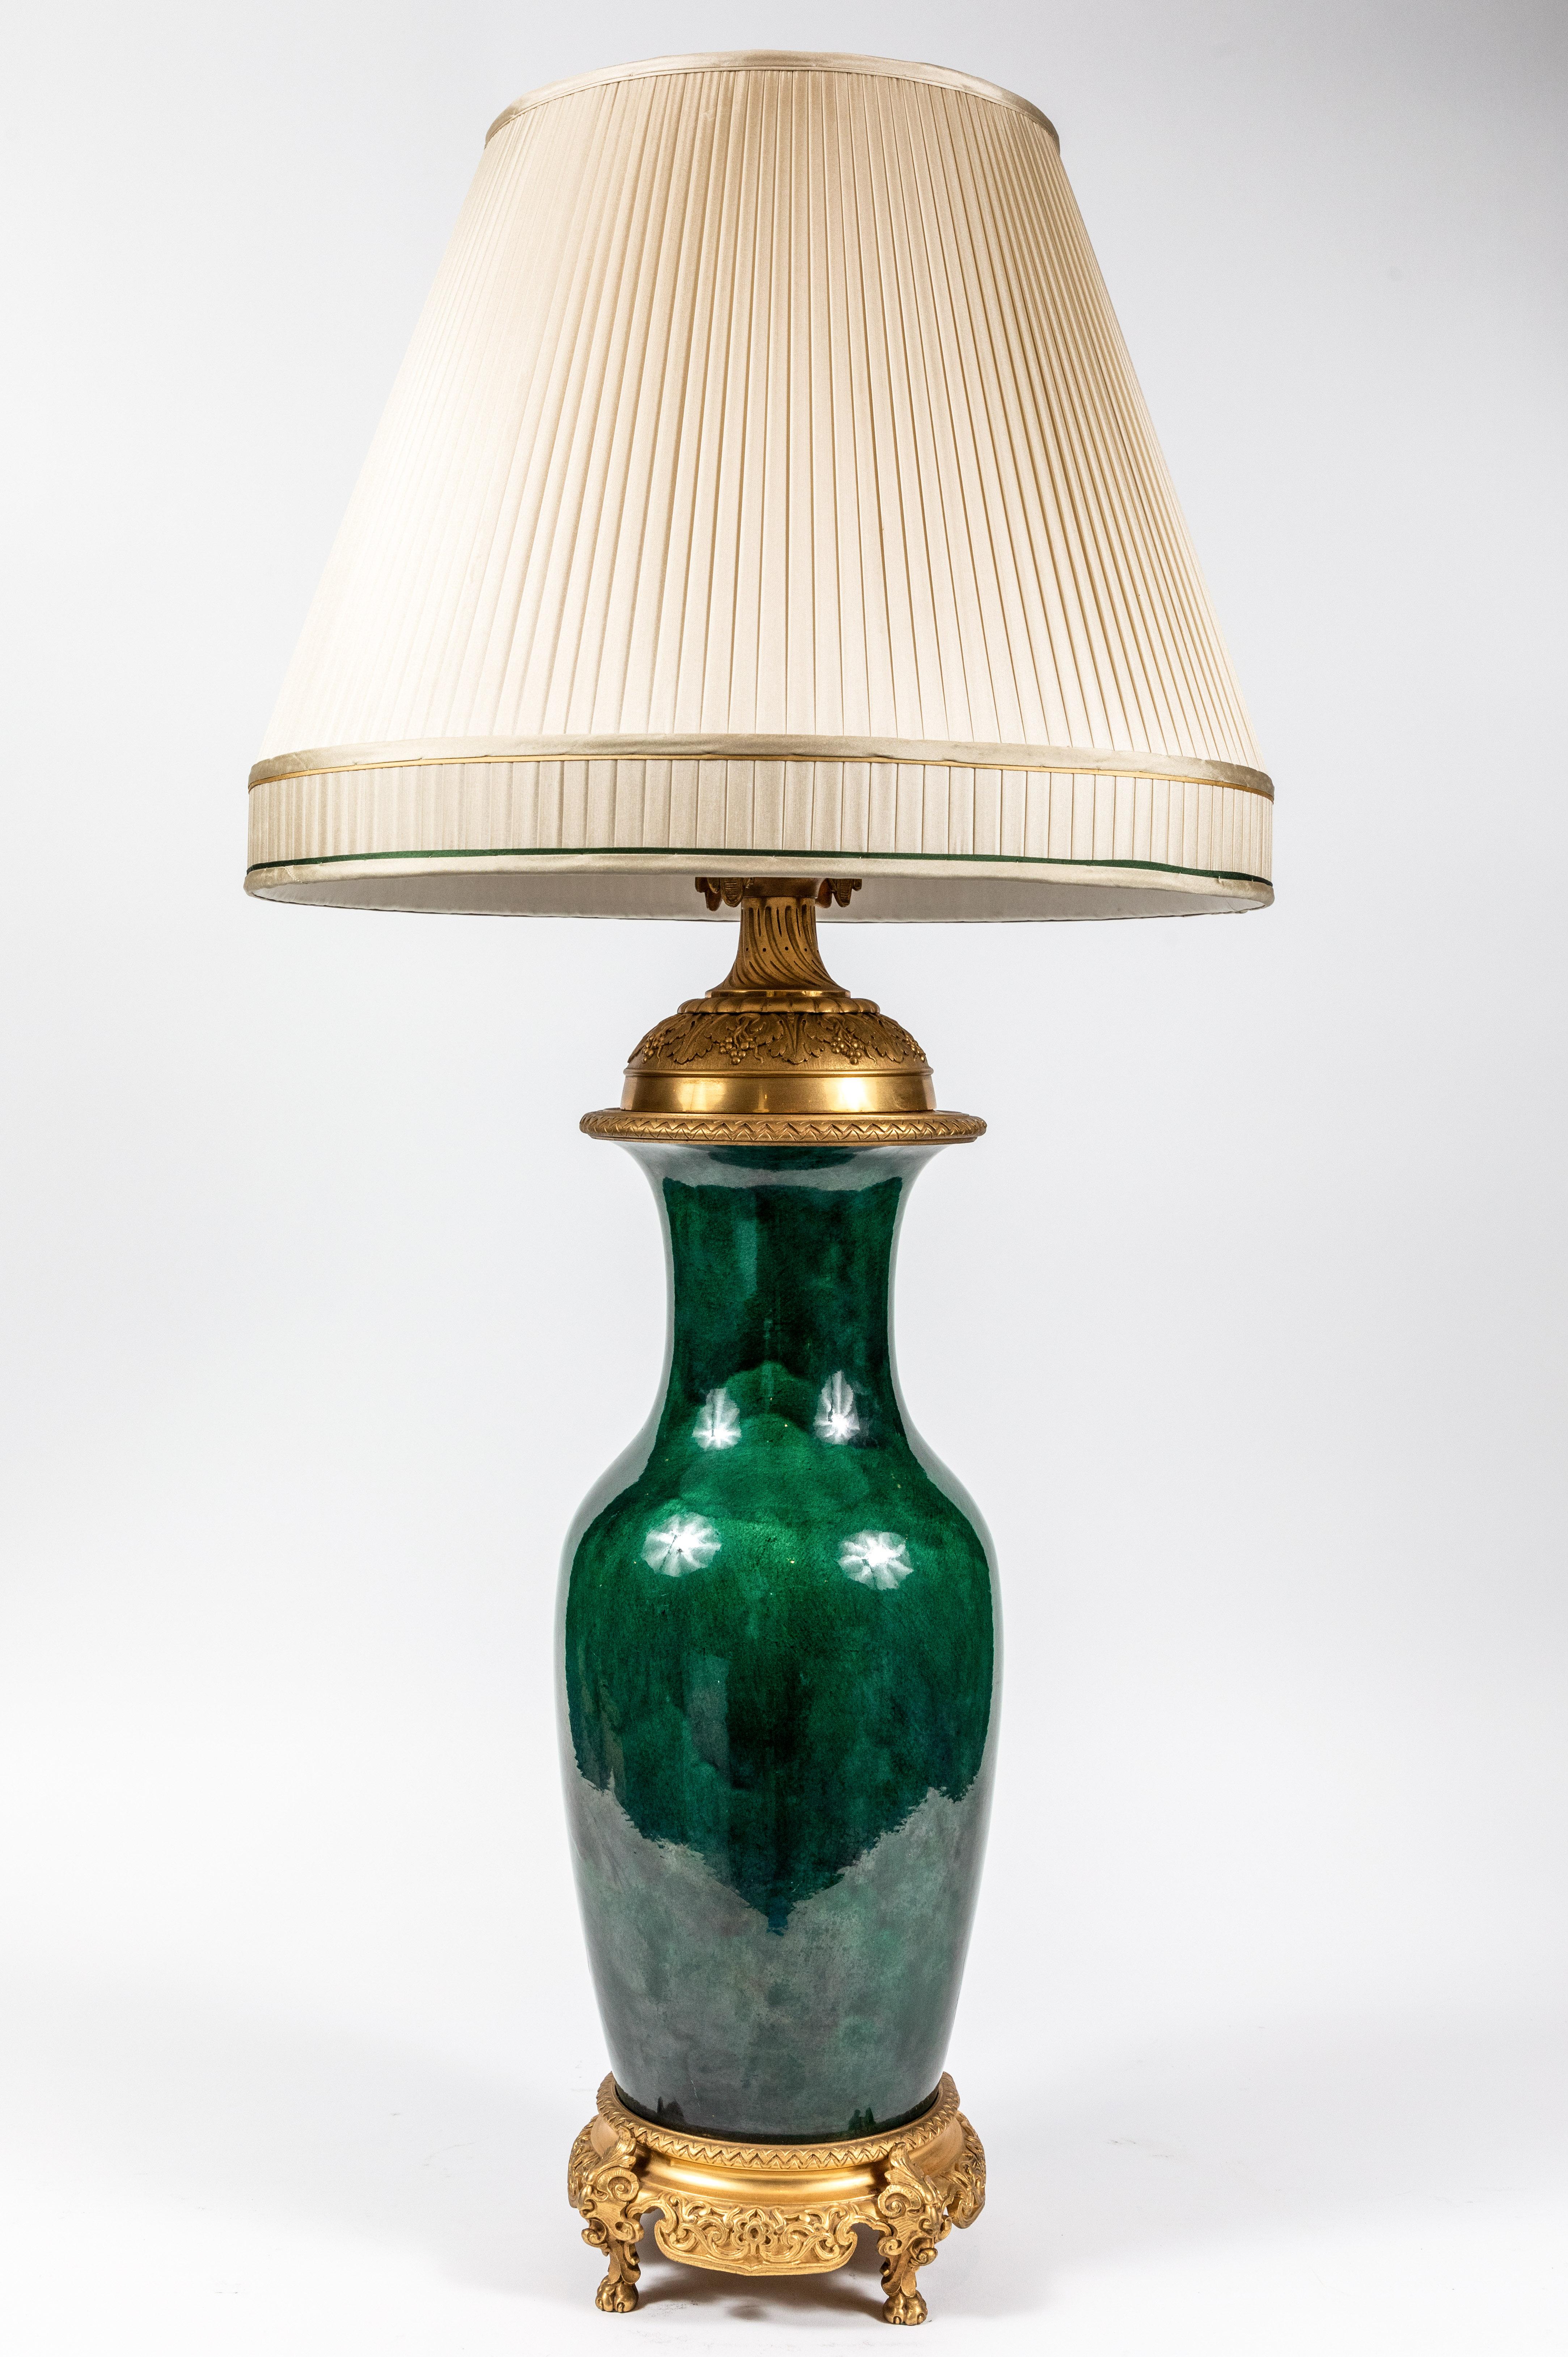 Pair of fine, large, French, green, glazed lamps with superior, molded, gilt bronze mounts. Each capped by custom, silk shades. Formerly gas lamps, now wired for U.S. current. 

Note: Measurements including shade: 38 in. height x 18 in. diameter.